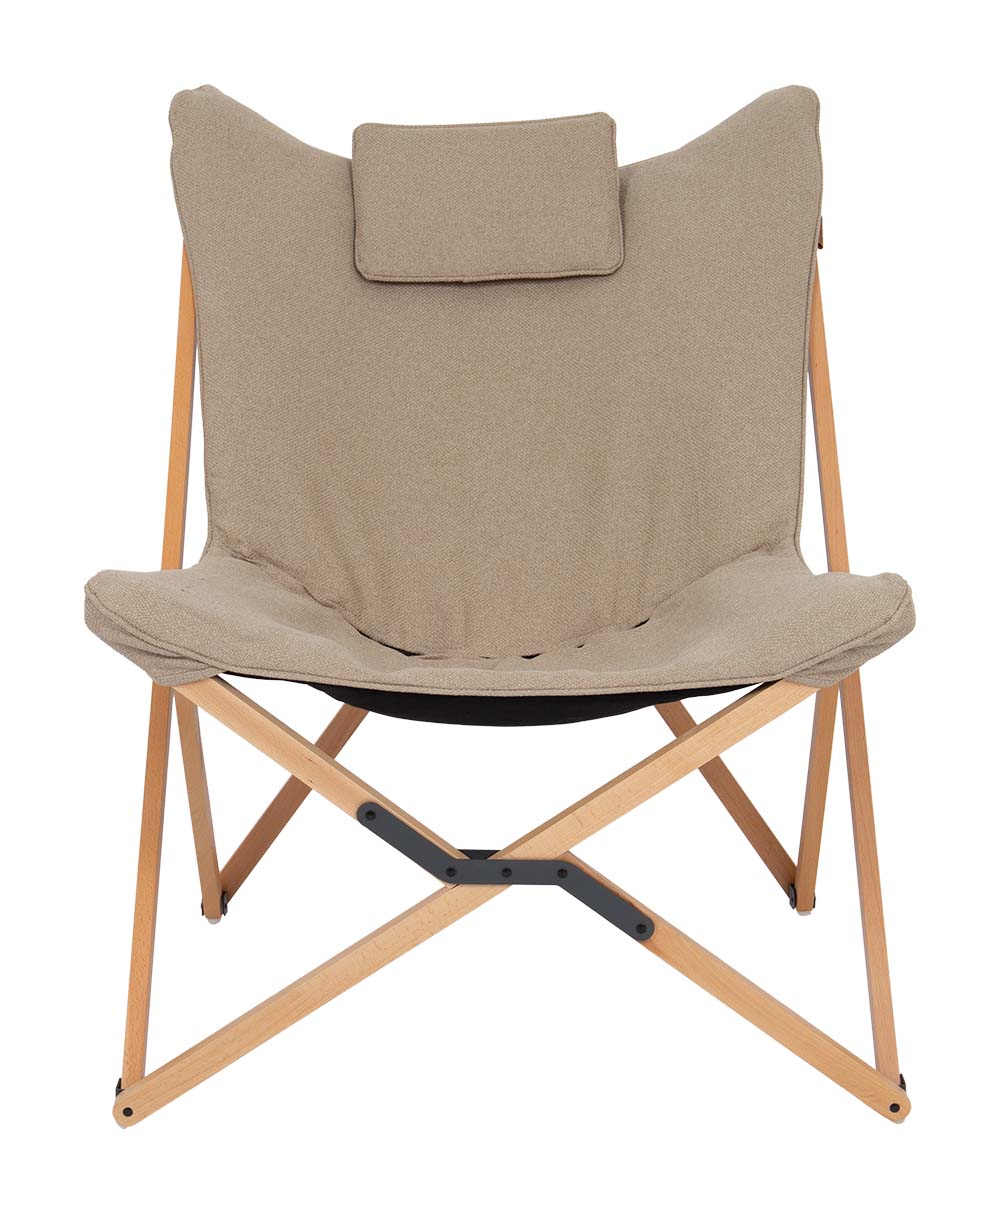 Bo-Camp - Urban Outdoor collection - Relaxsessel - Wembley - L - Nika - Beige detail 2